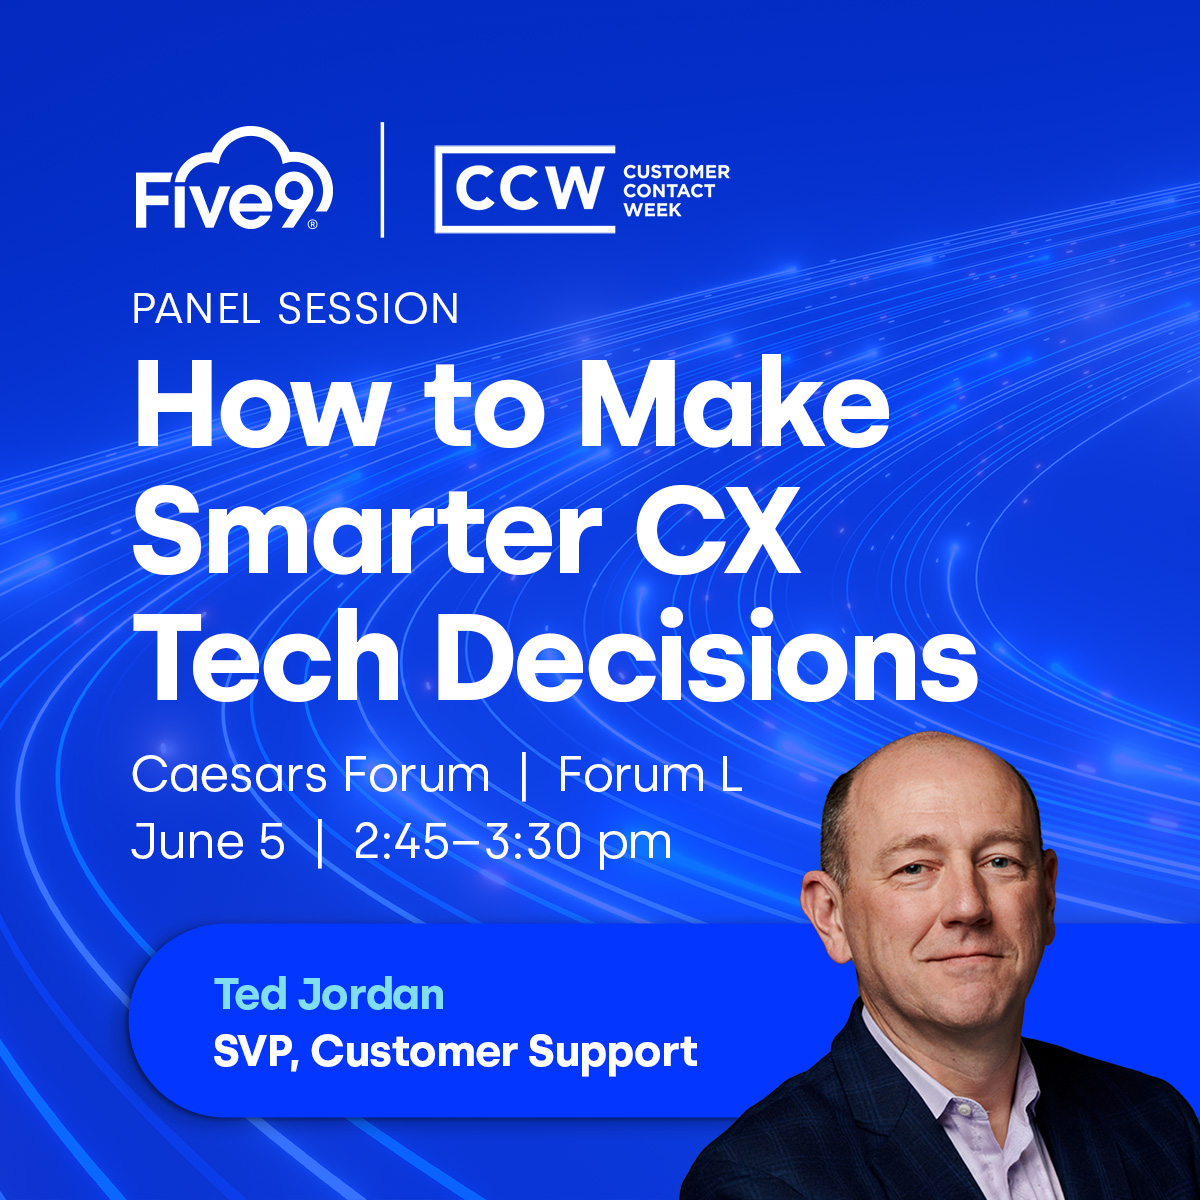 Join Ted Jordan of Five9 at #CCWVegas for a panel session and learn to: 🤓 Make smarter #CX tech decisions 🔍 Explore the challenges of selecting & integrating tech within tight budgets ✍️ Craft a digital strategy Save your spot: spr.ly/6017ejLaS @CustContactWeek